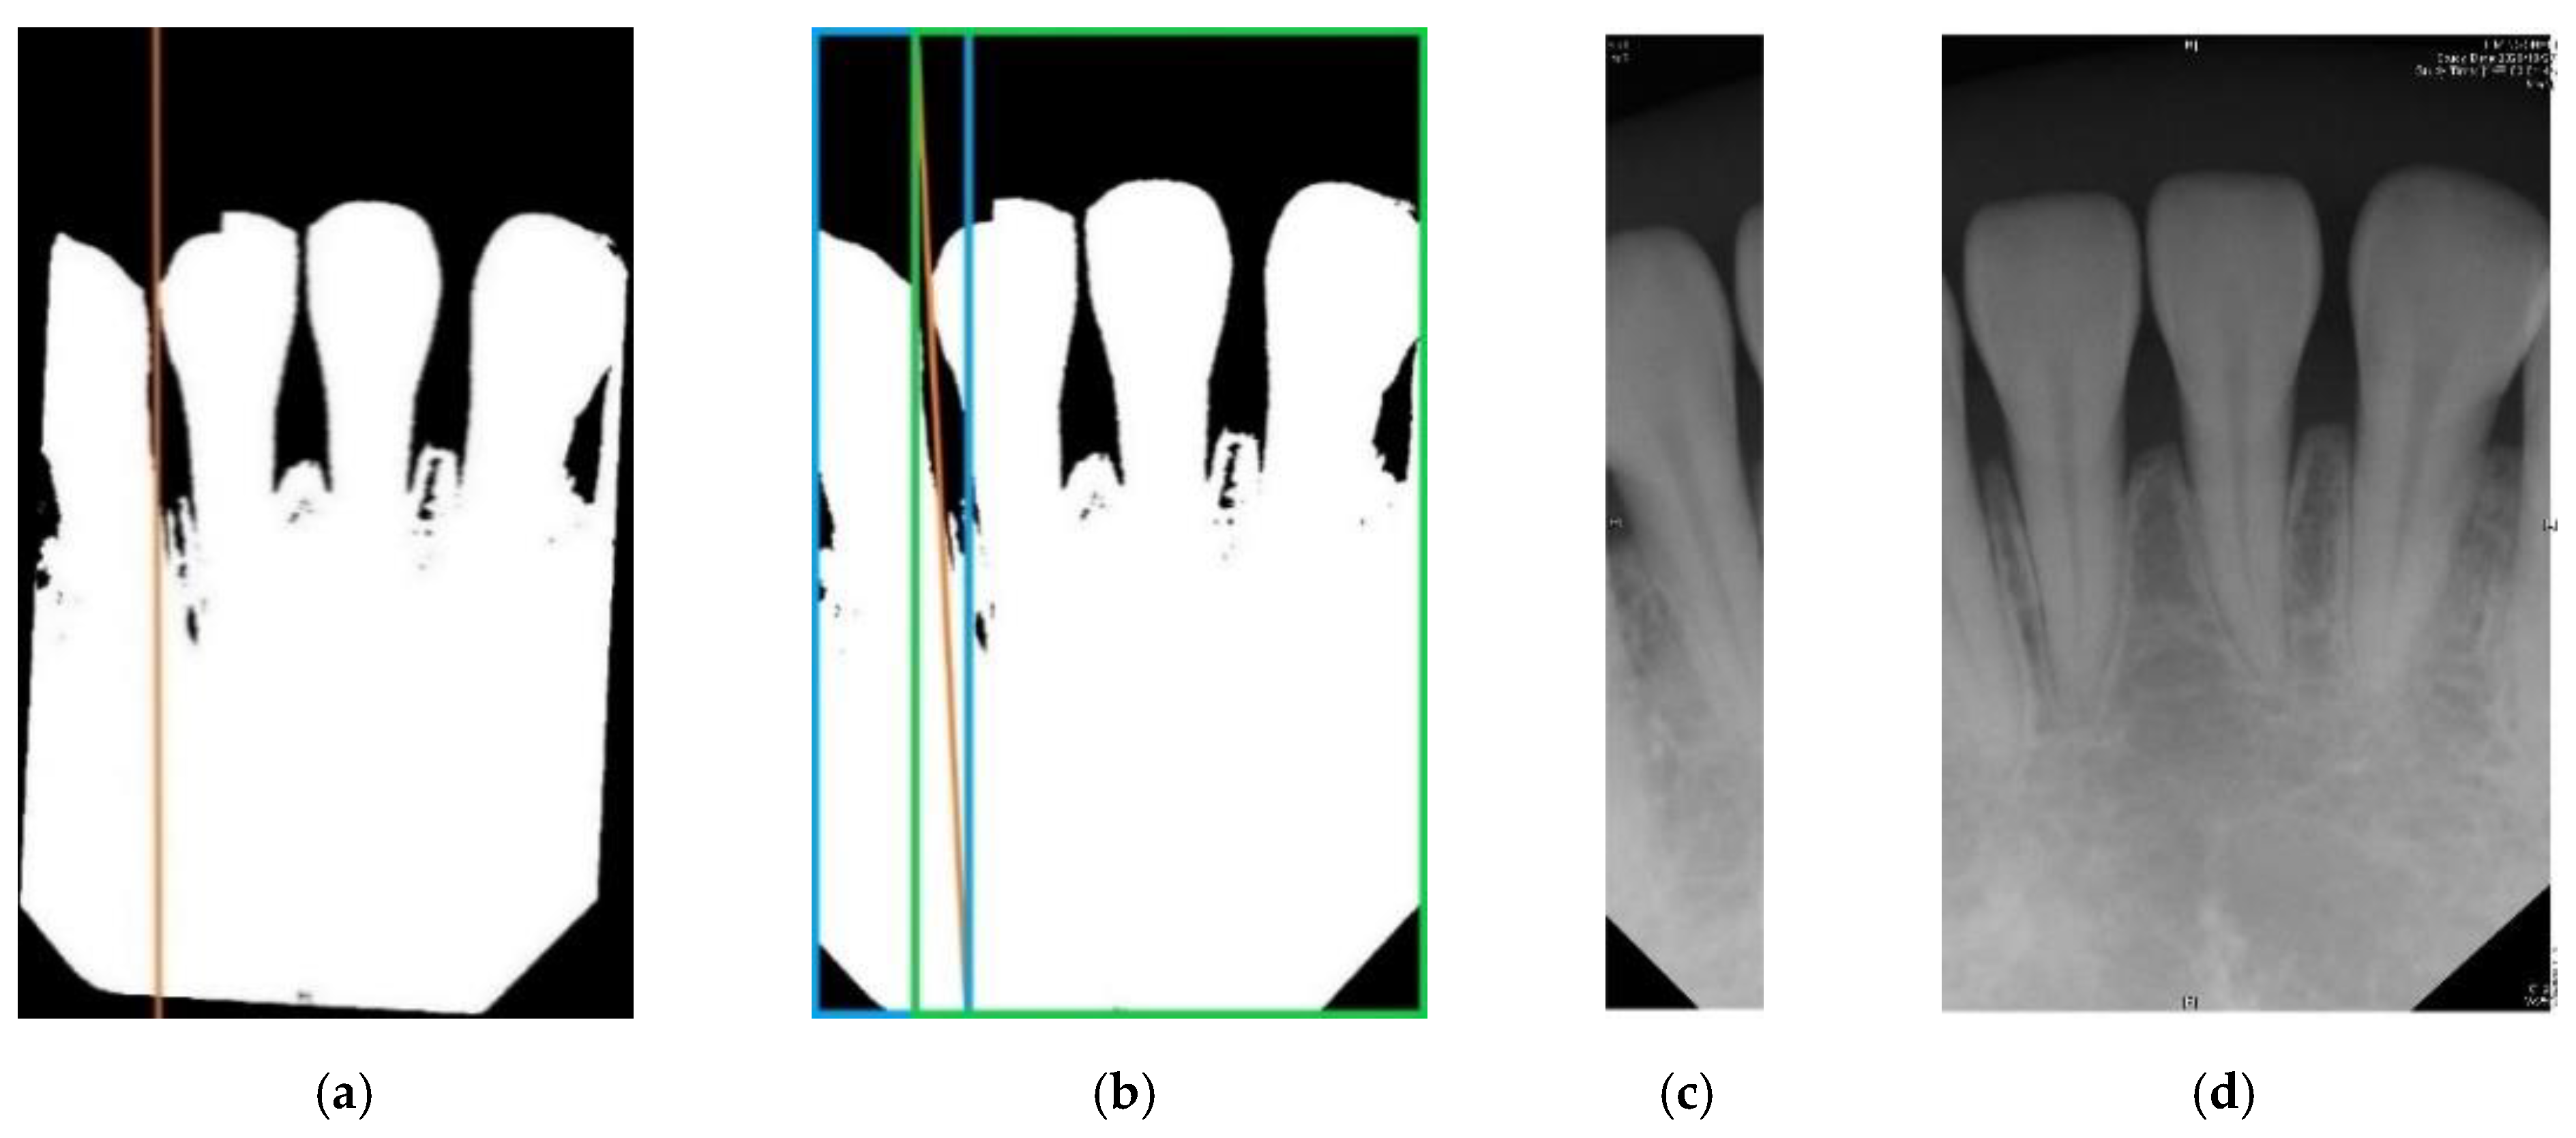 sensors free full text detection of dental apical lesions using cnns on periapical radiograph html